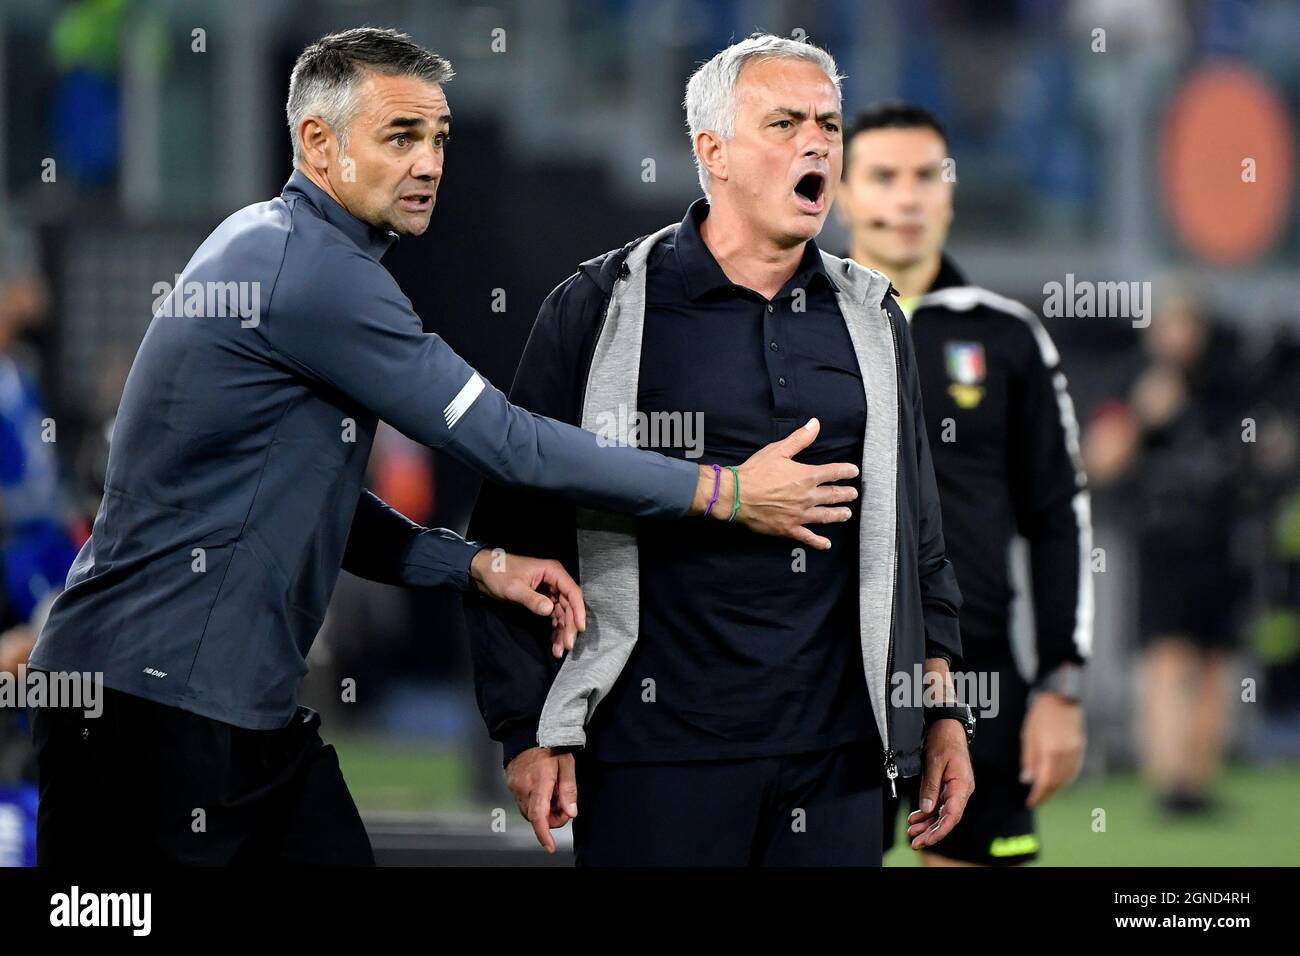 Roma, Italy. 23rd Sep, 2021. Nuno Gomes and Jose Mourinho coach of AS Roma react during the Serie A football match between AS Roma and Udinese calcio at Olimpico stadium in Rome (Italy), September 23th, 2021. Photo Andrea Staccioli/Insidefoto Credit: insidefoto srl/Alamy Live News Stock Photo